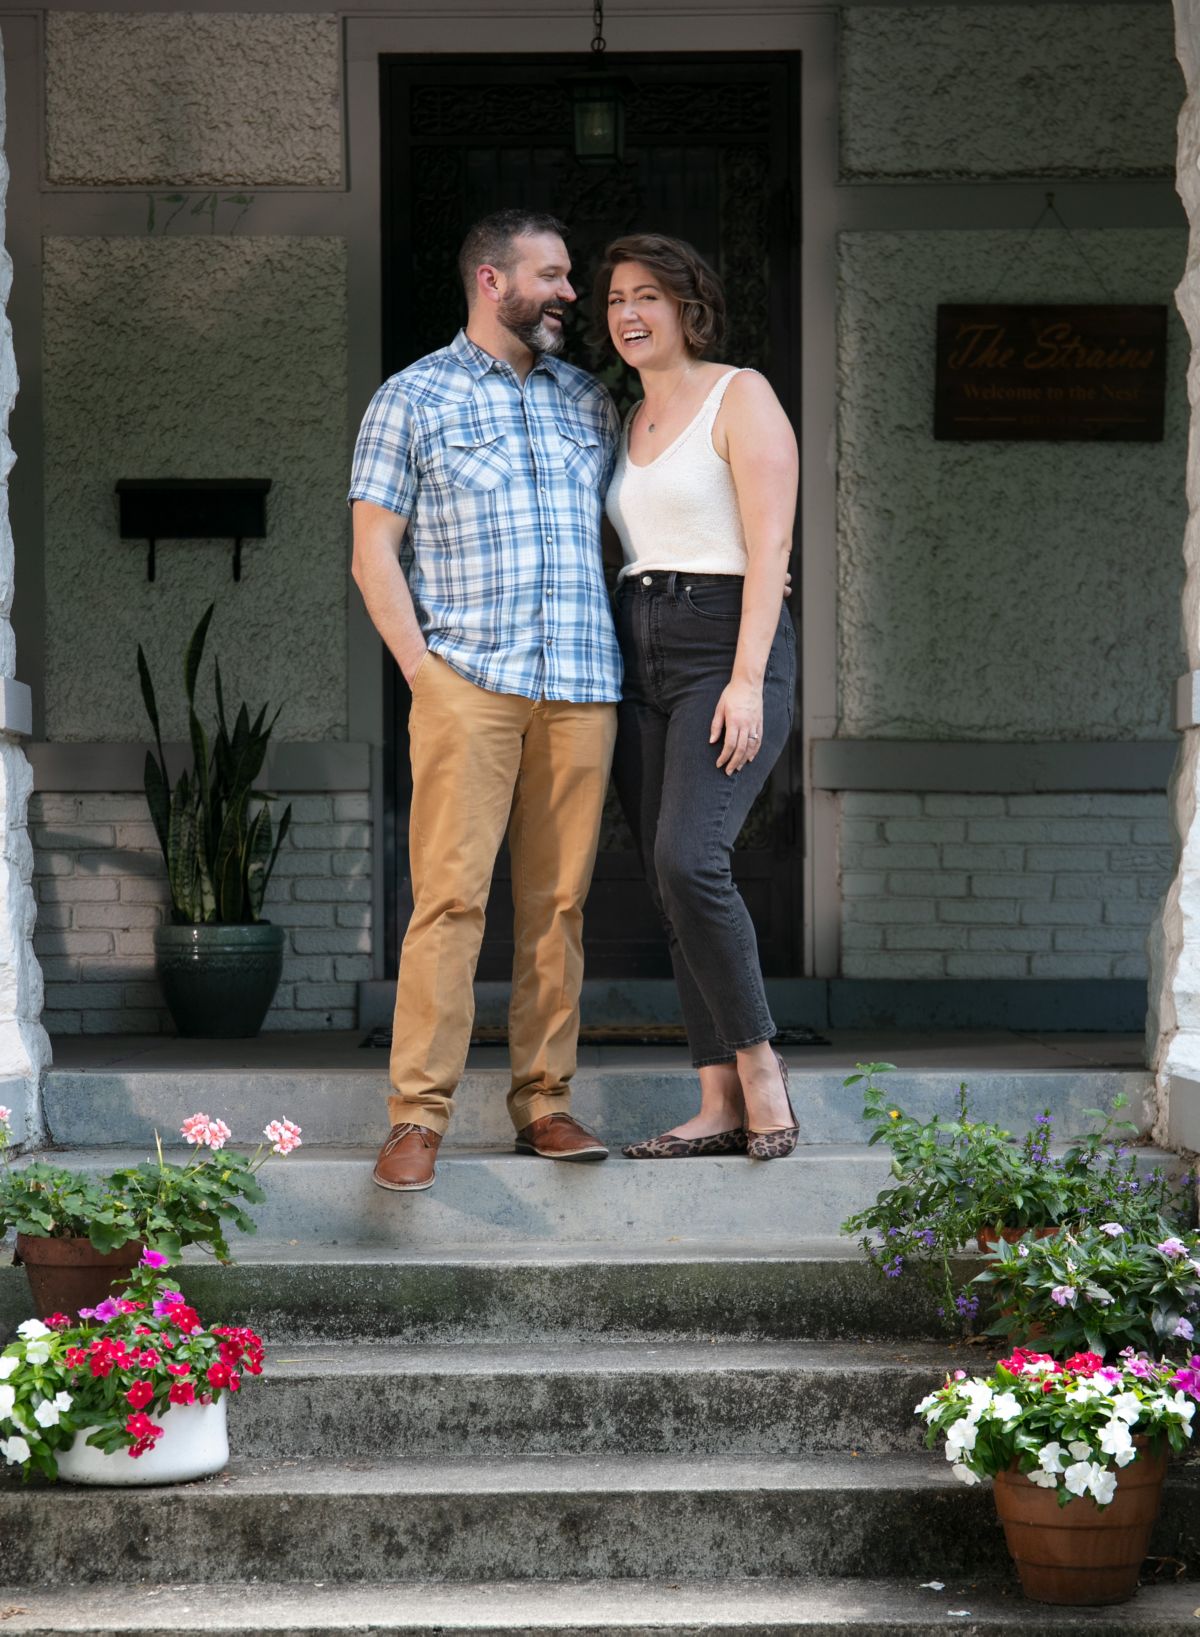 Sarah Strain and her husband stand on their front porch